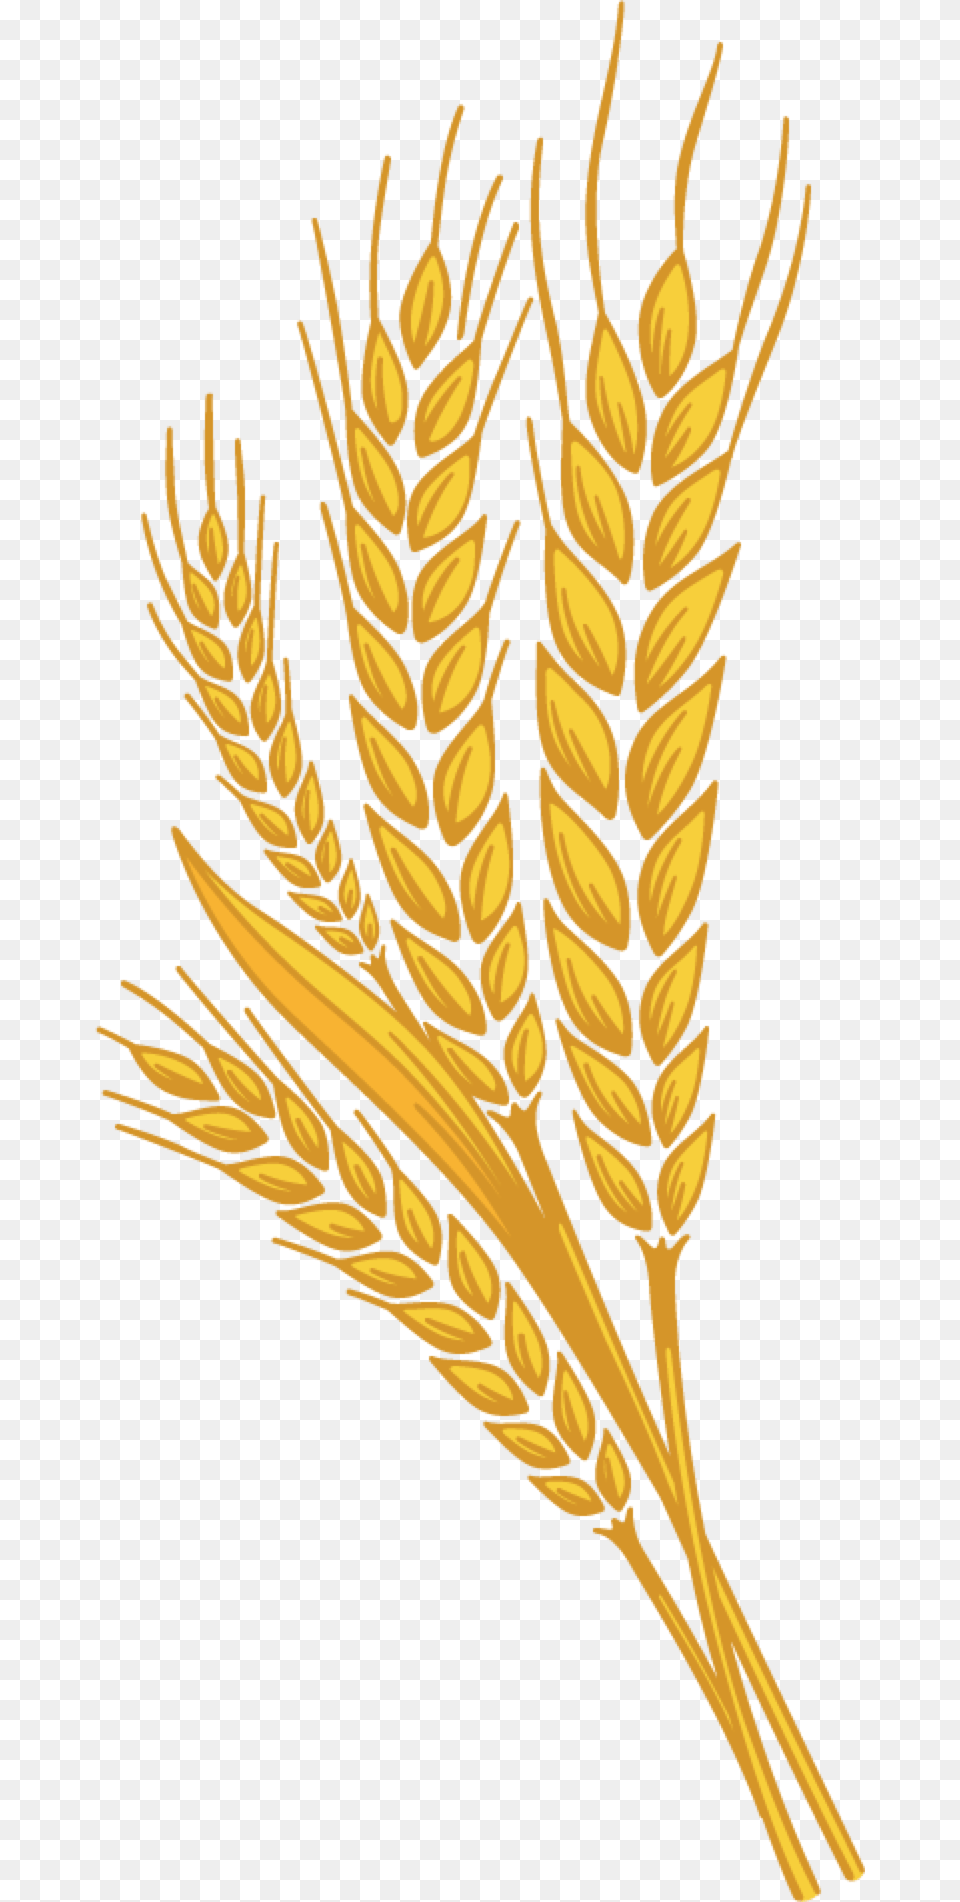 Wheat Sugar Added Country Harvest Wheat, Food, Grain, Produce Png Image